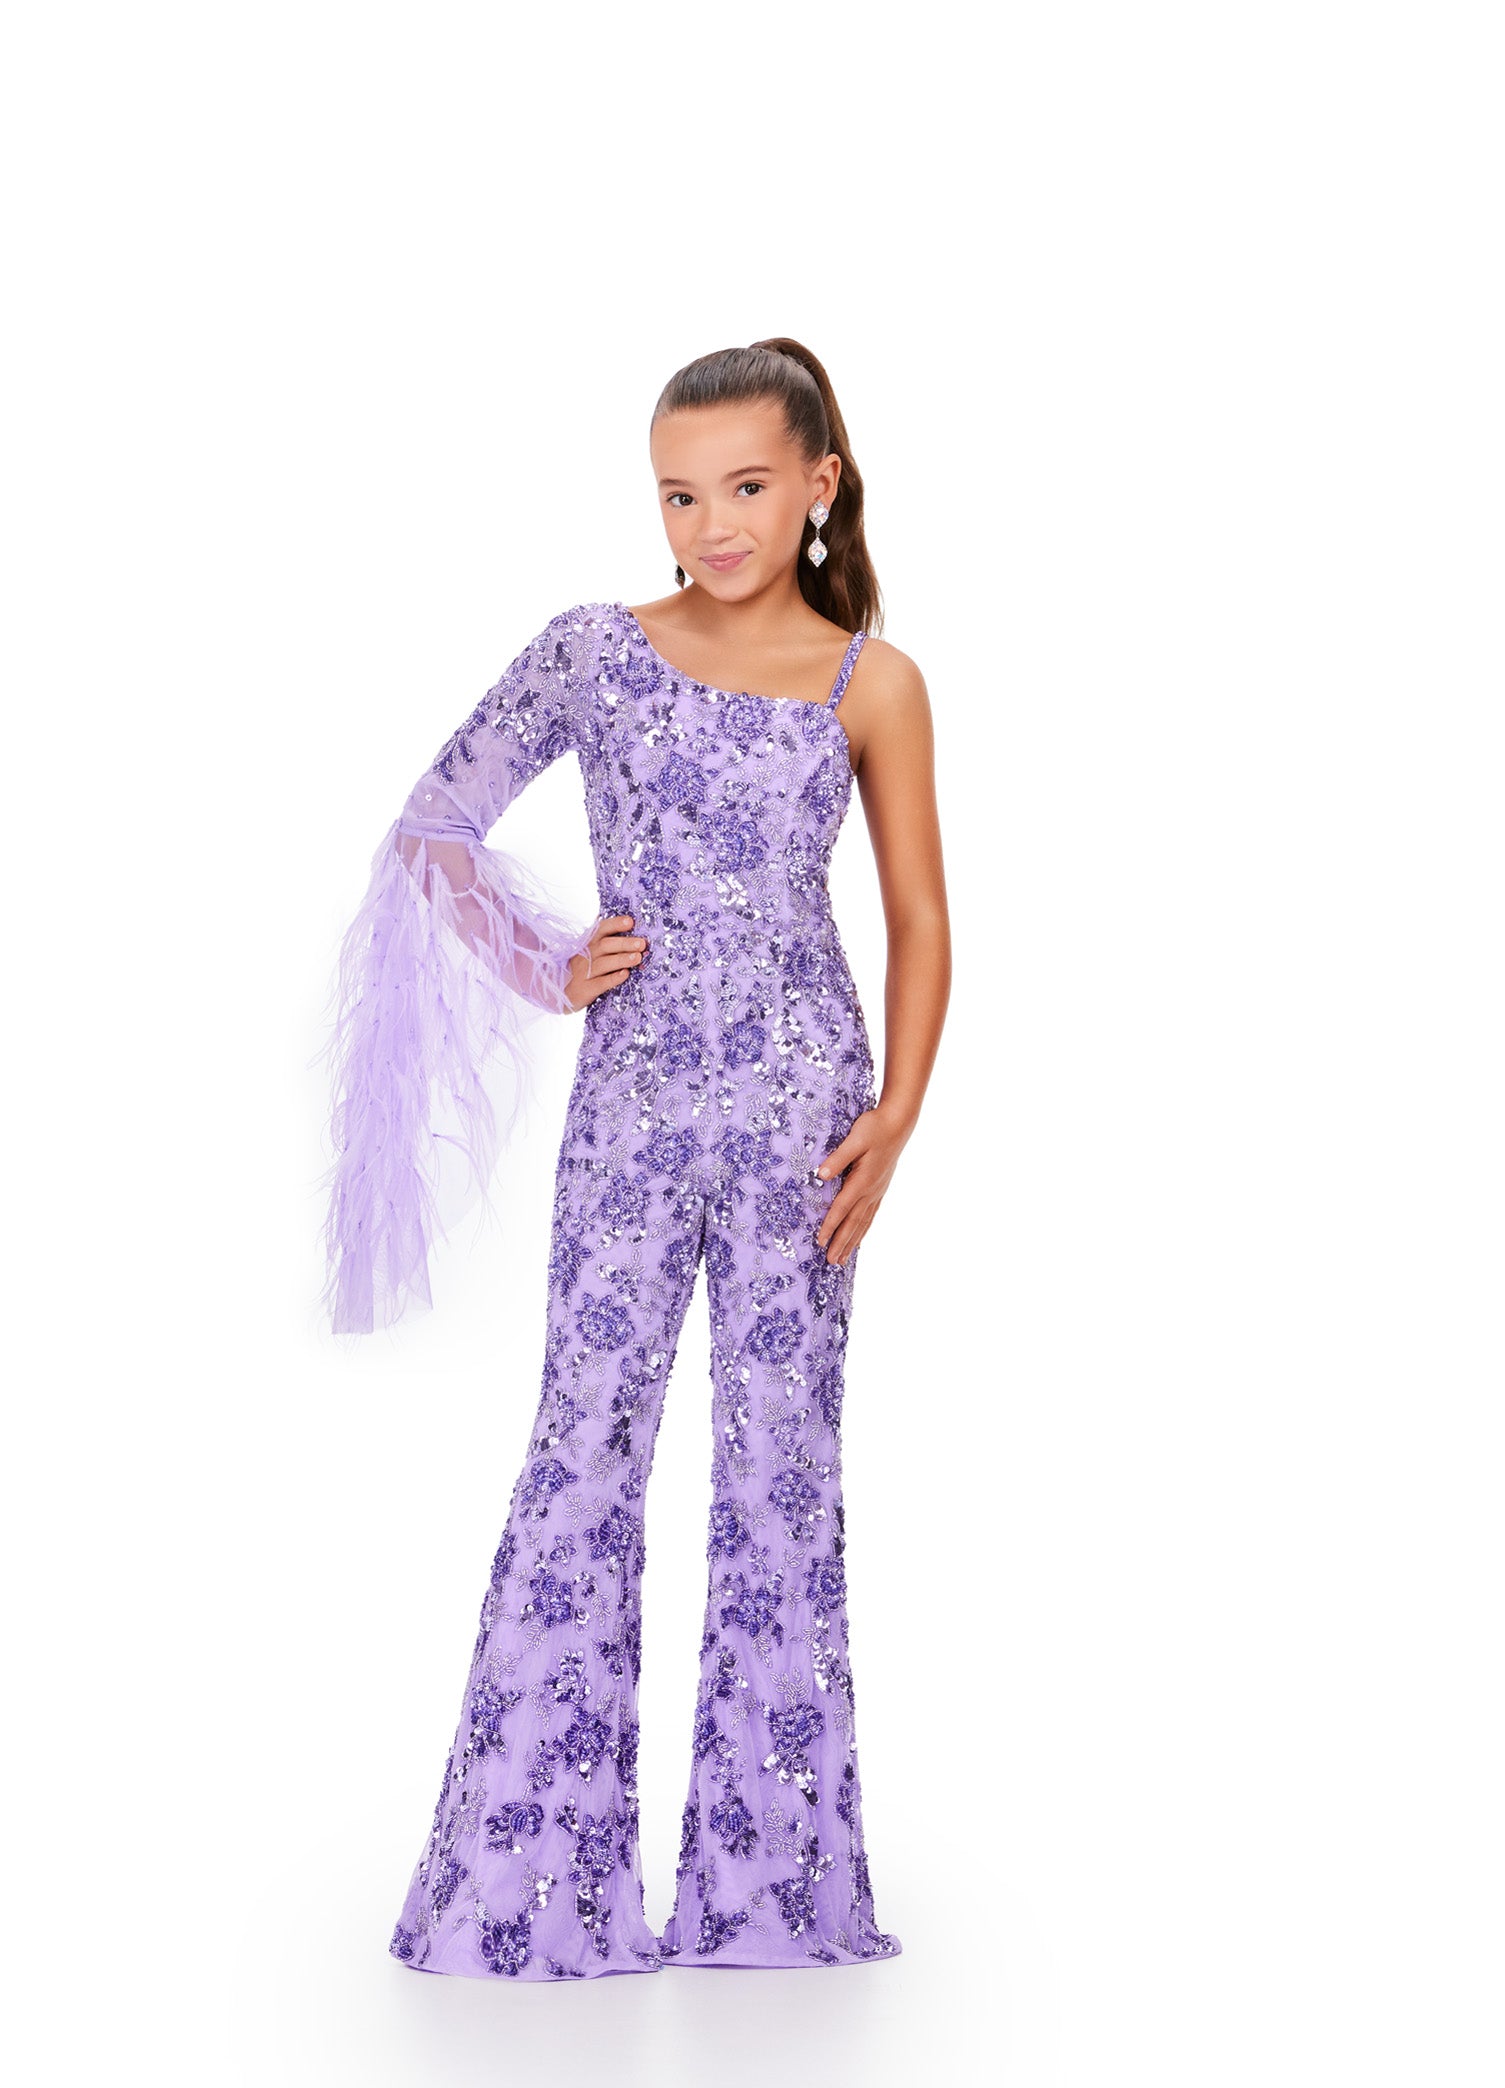 The Ashley Lauren Kids 8268 Girls Beaded Pageant Jumpsuit is a must-have for any fashion-forward young lady. Adorned with intricate beadwork and featuring dramatic feather bell sleeves, this jumpsuit will make her feel like a true fashionista. Perfect for pageants or any special occasion, it's both stylish and fun. This one shoulder kids jumpsuit features an intricate bead pattern throughout. The look is complete with a bell-sleeve scattered with feathers.